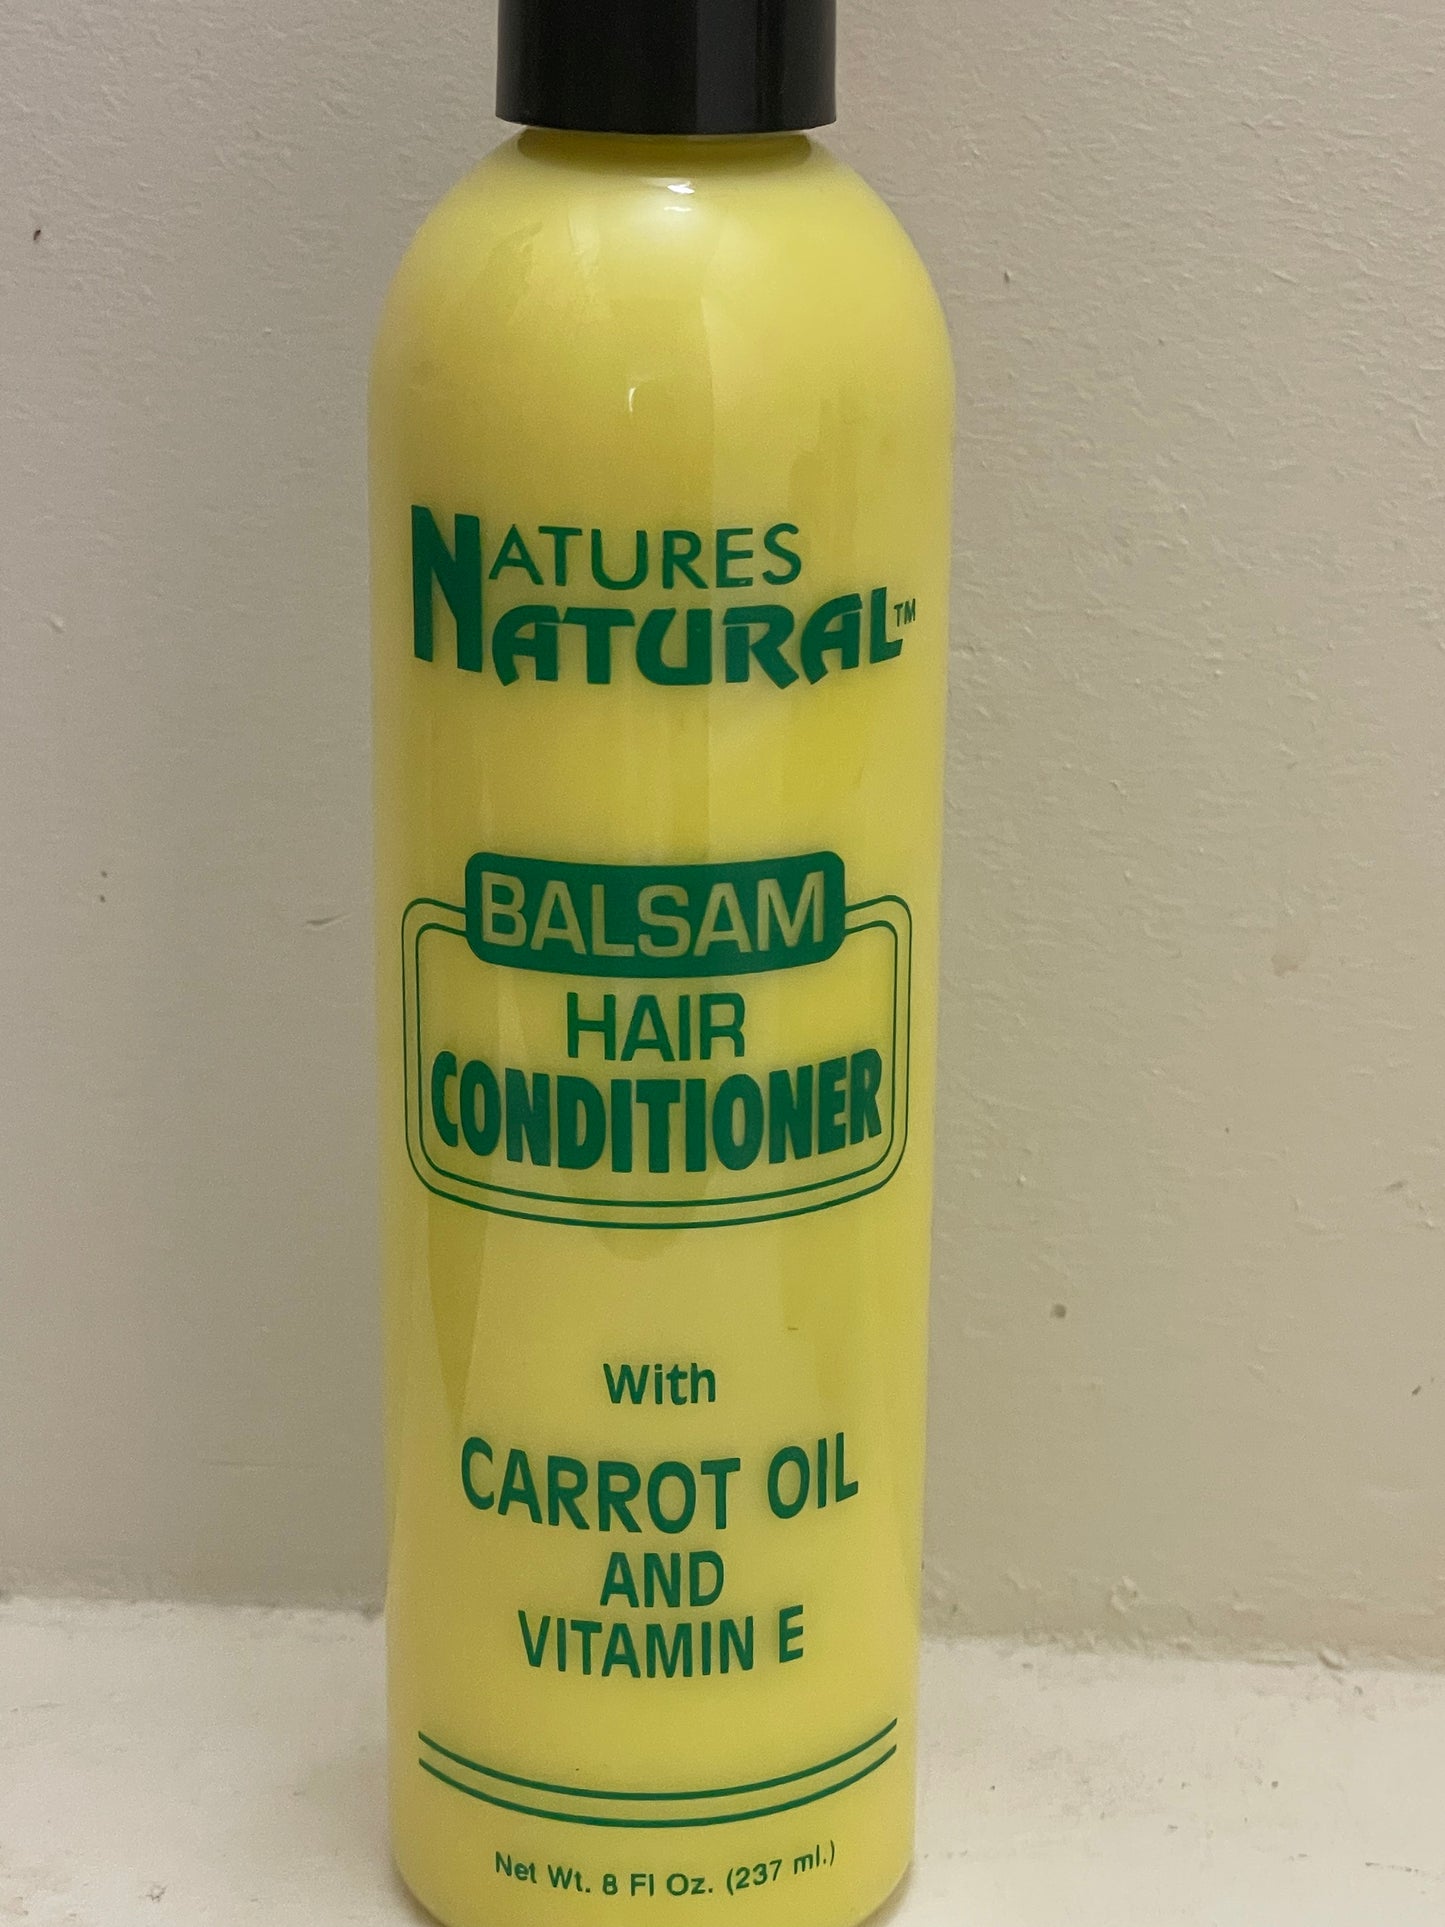 NATURE'S NATURAL BALSAM HAIR CONDITIONER 8 OZ